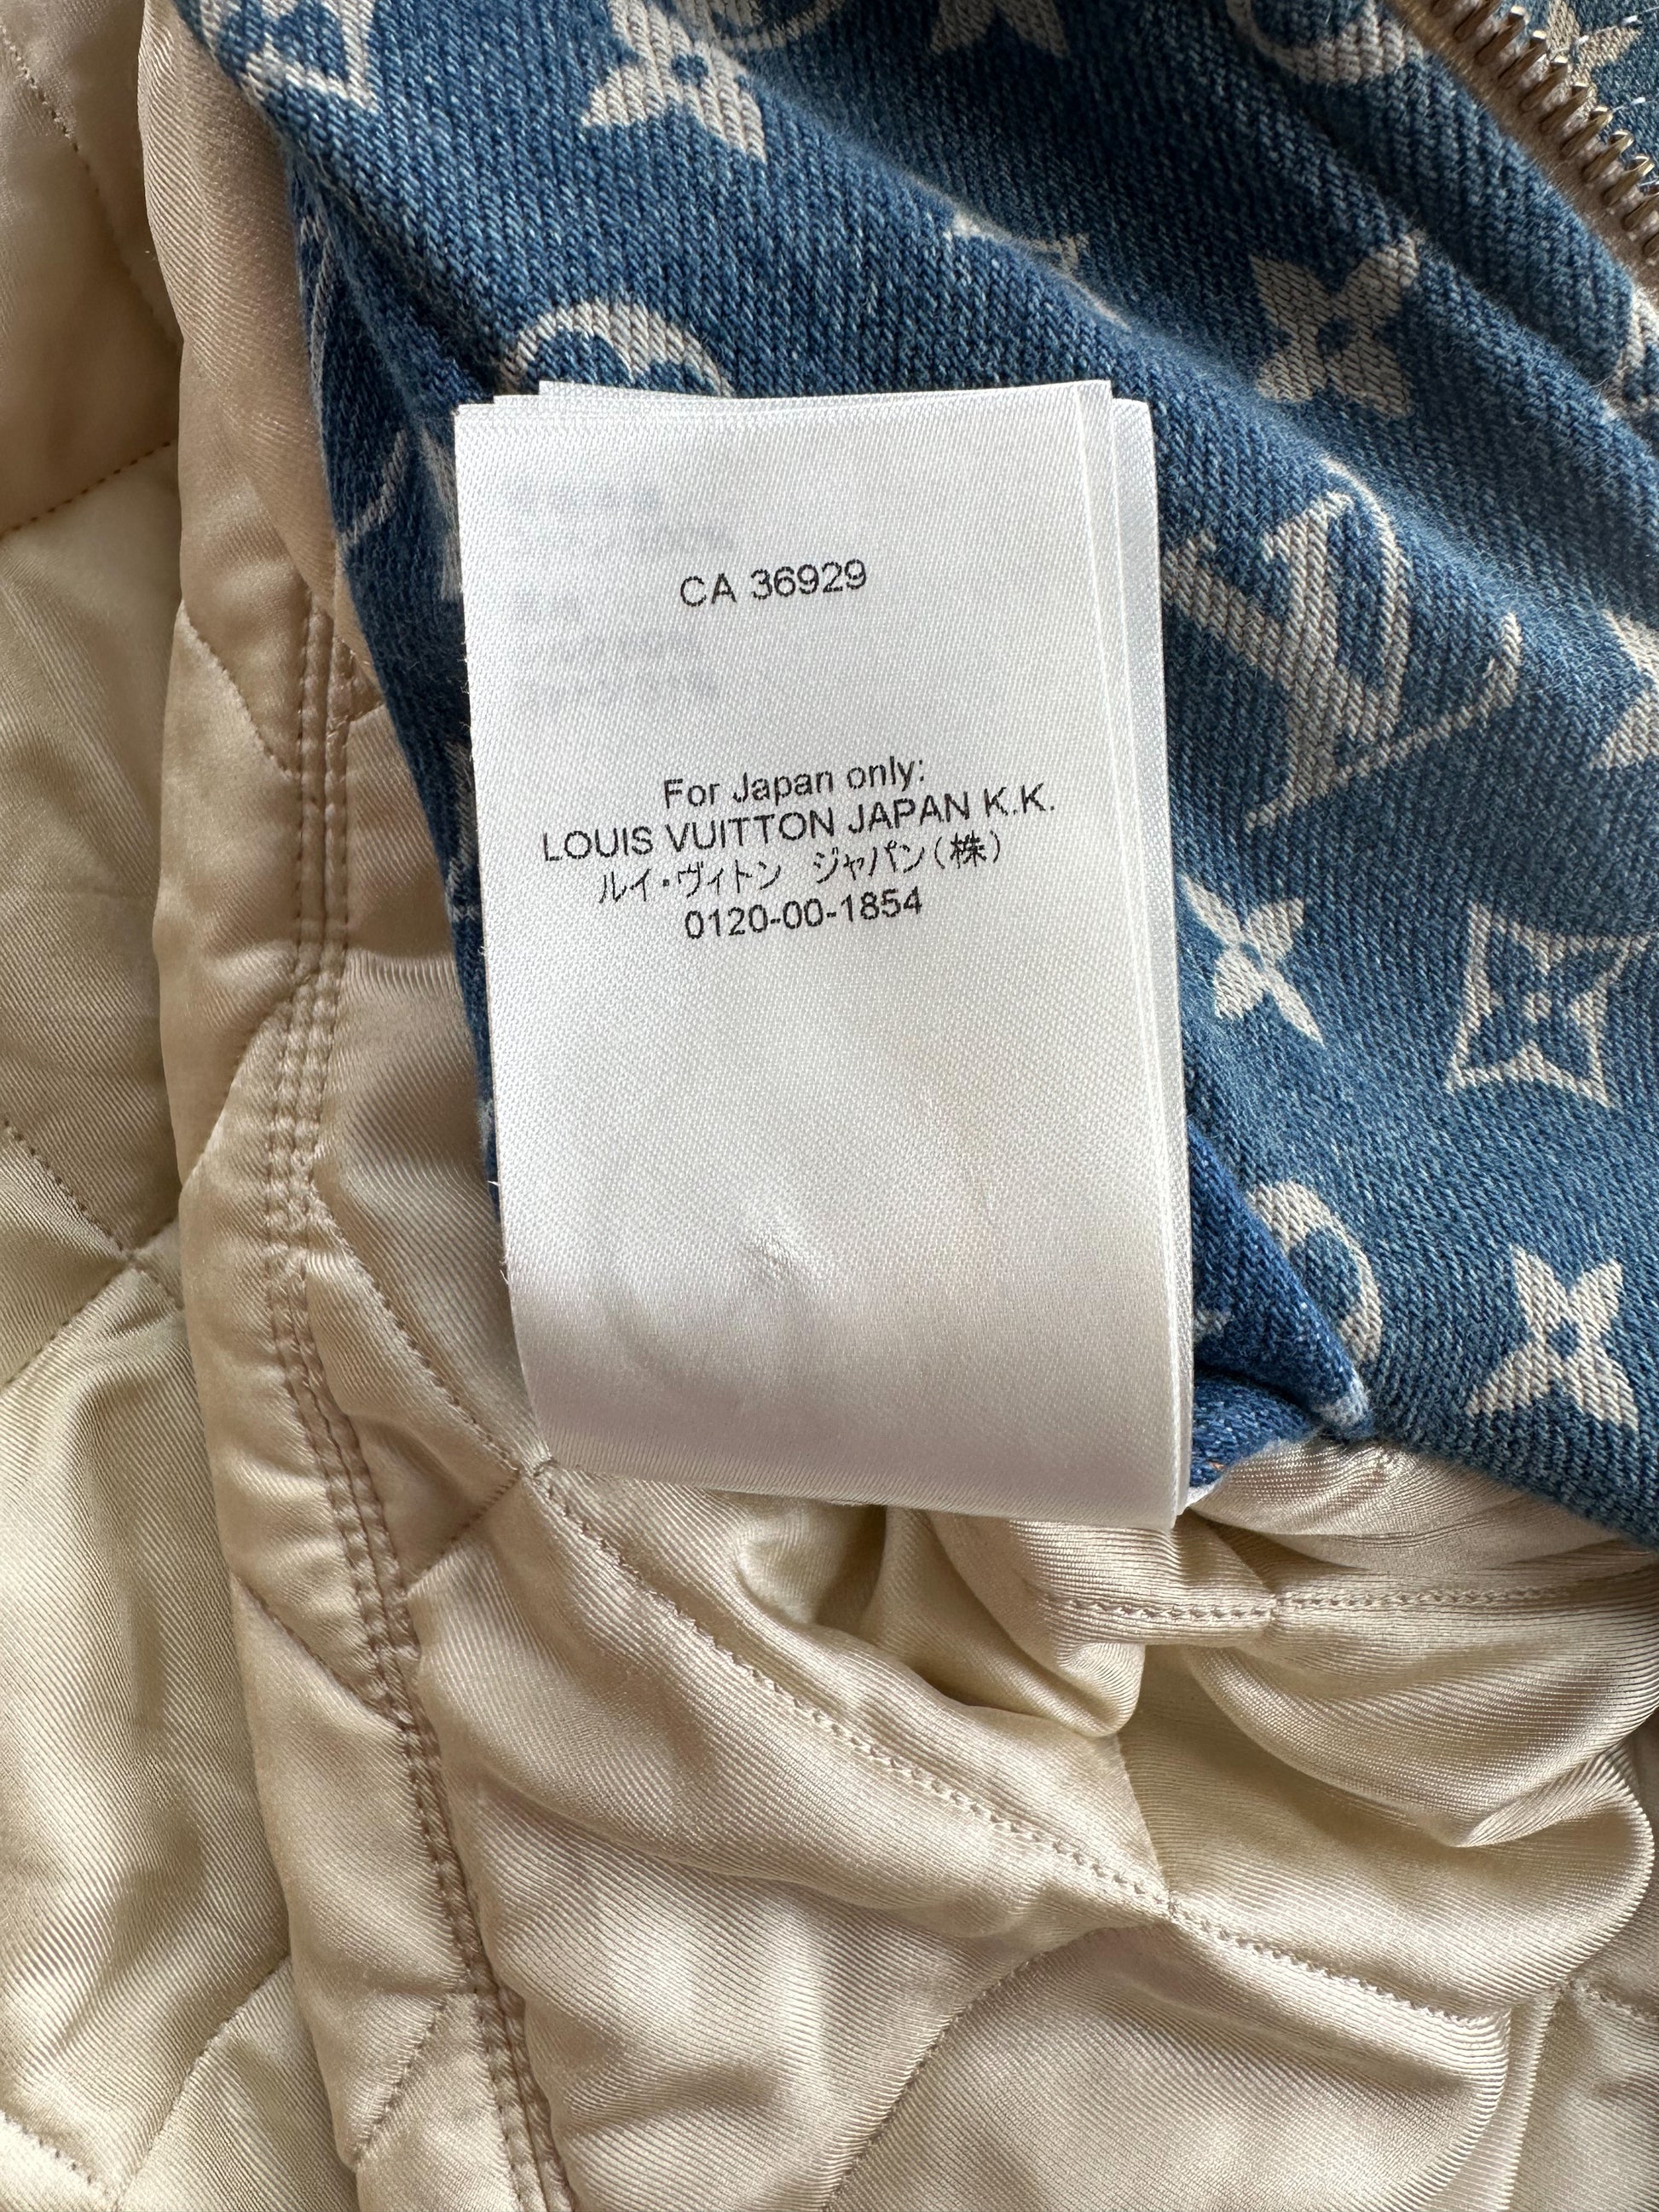 Pre-owned Louis Vuitton Silk Coat In Blue